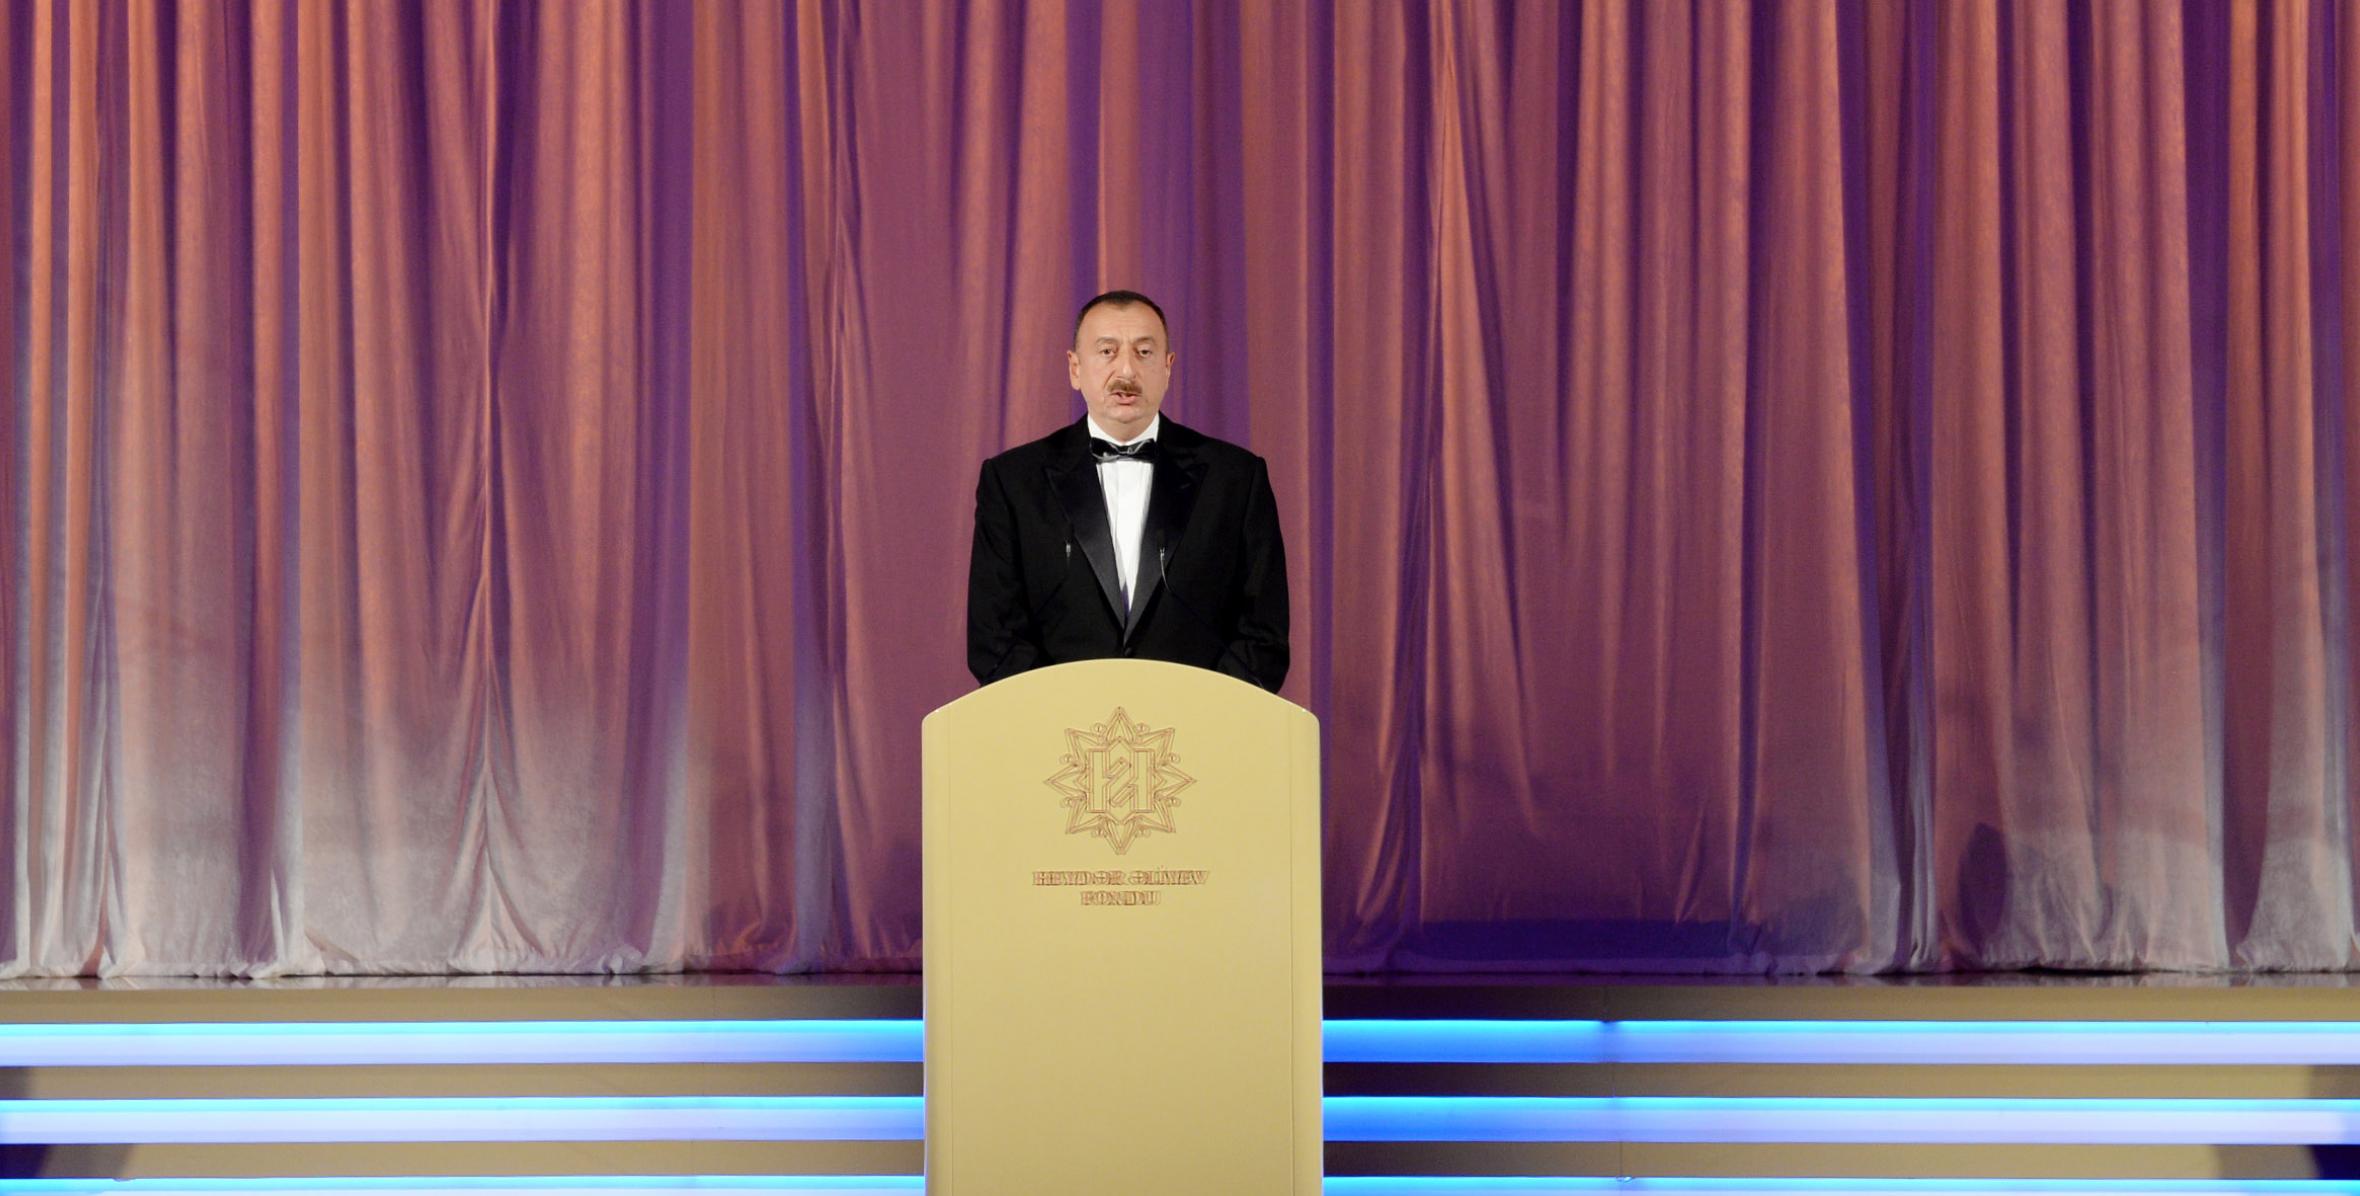 Speech by Ilham Aliyev at the official ceremony to mark the 91st birthday anniversary of nationwide leader of the Azerbaijani people Heydar Aliyev and 10th anniversary of the establishment of the Heydar Aliyev Foundation